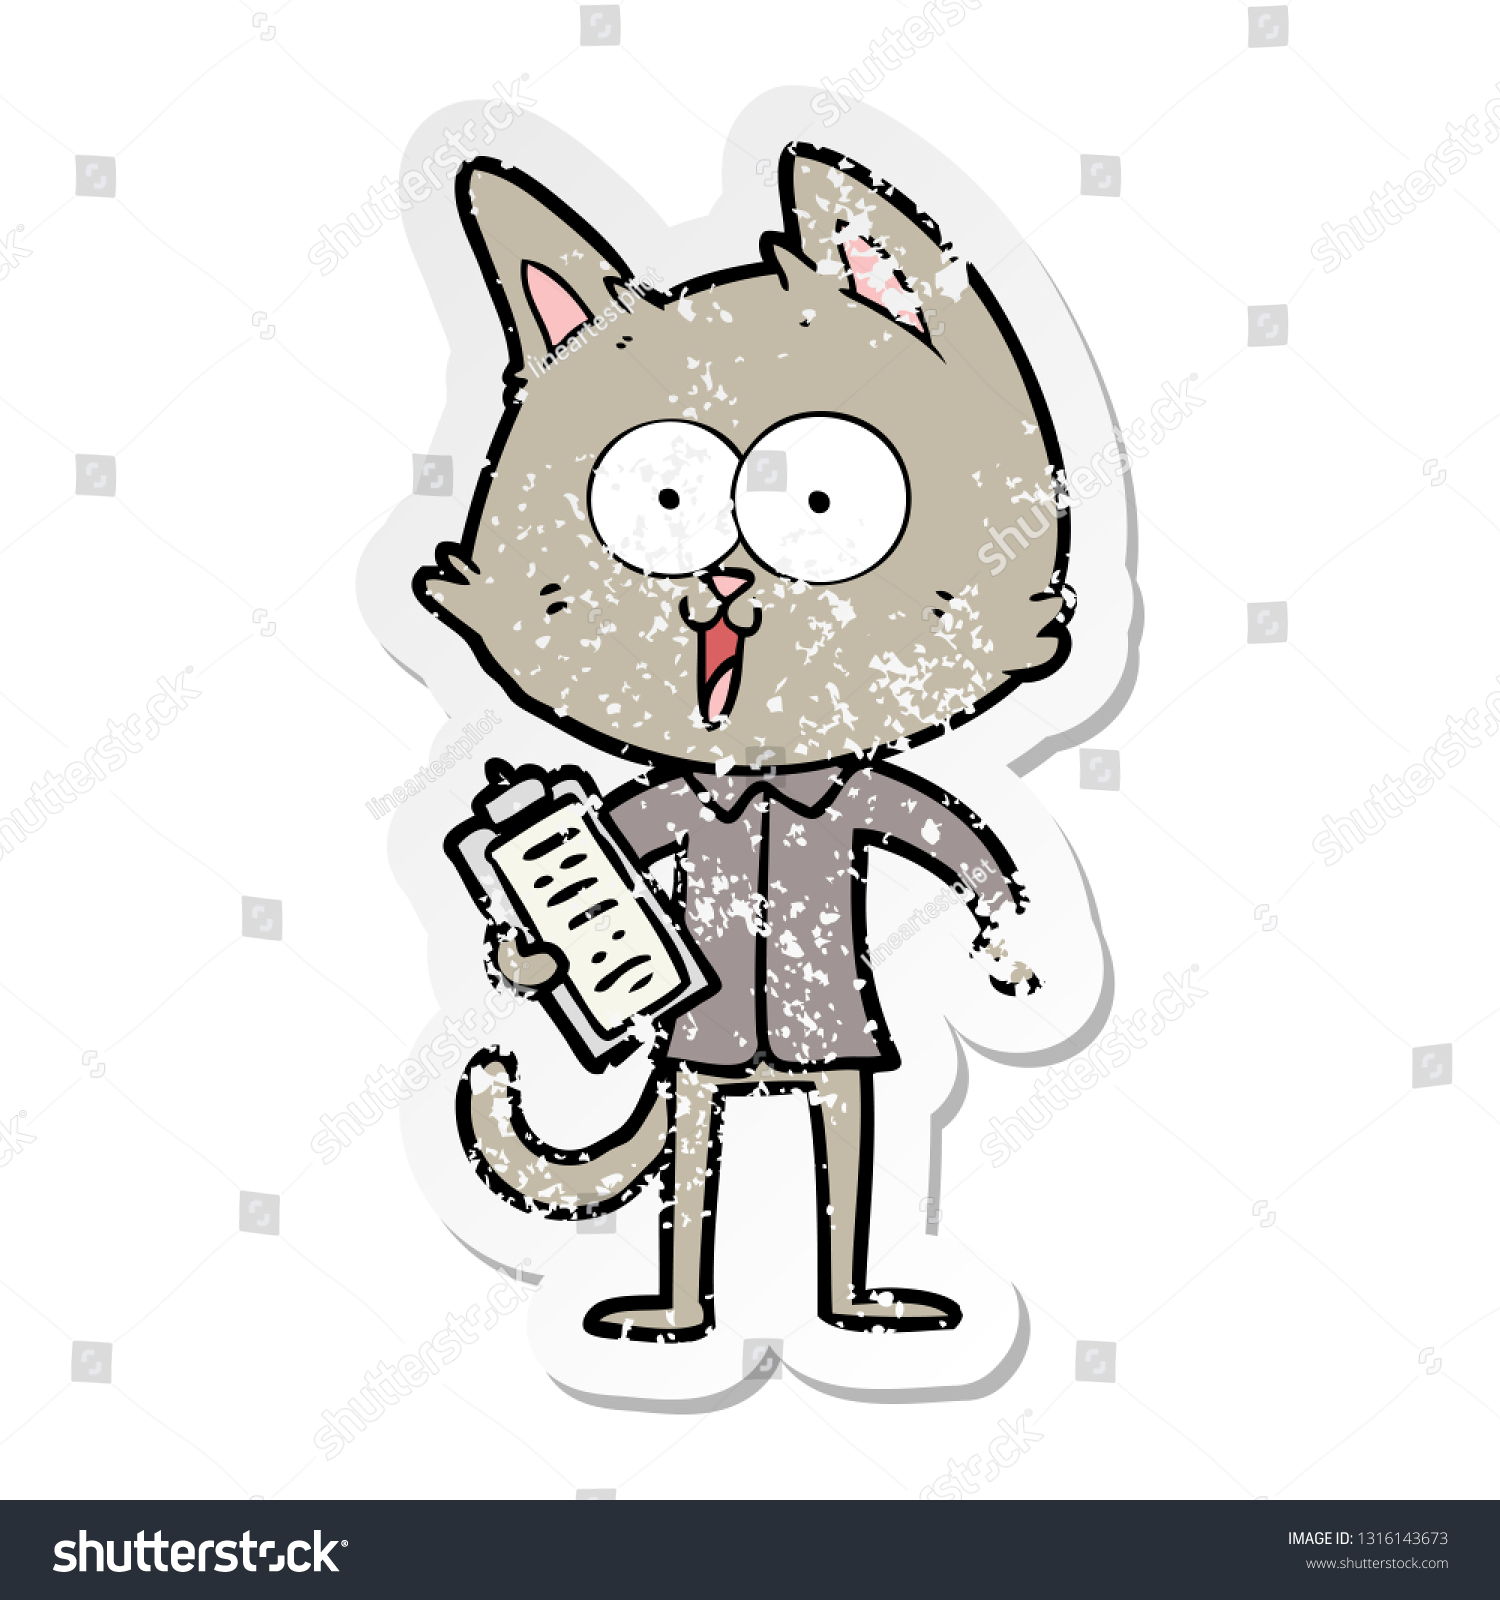 Distressed Sticker Funny Cartoon Cat Wearing Stock Vector Royalty Free 1316143673